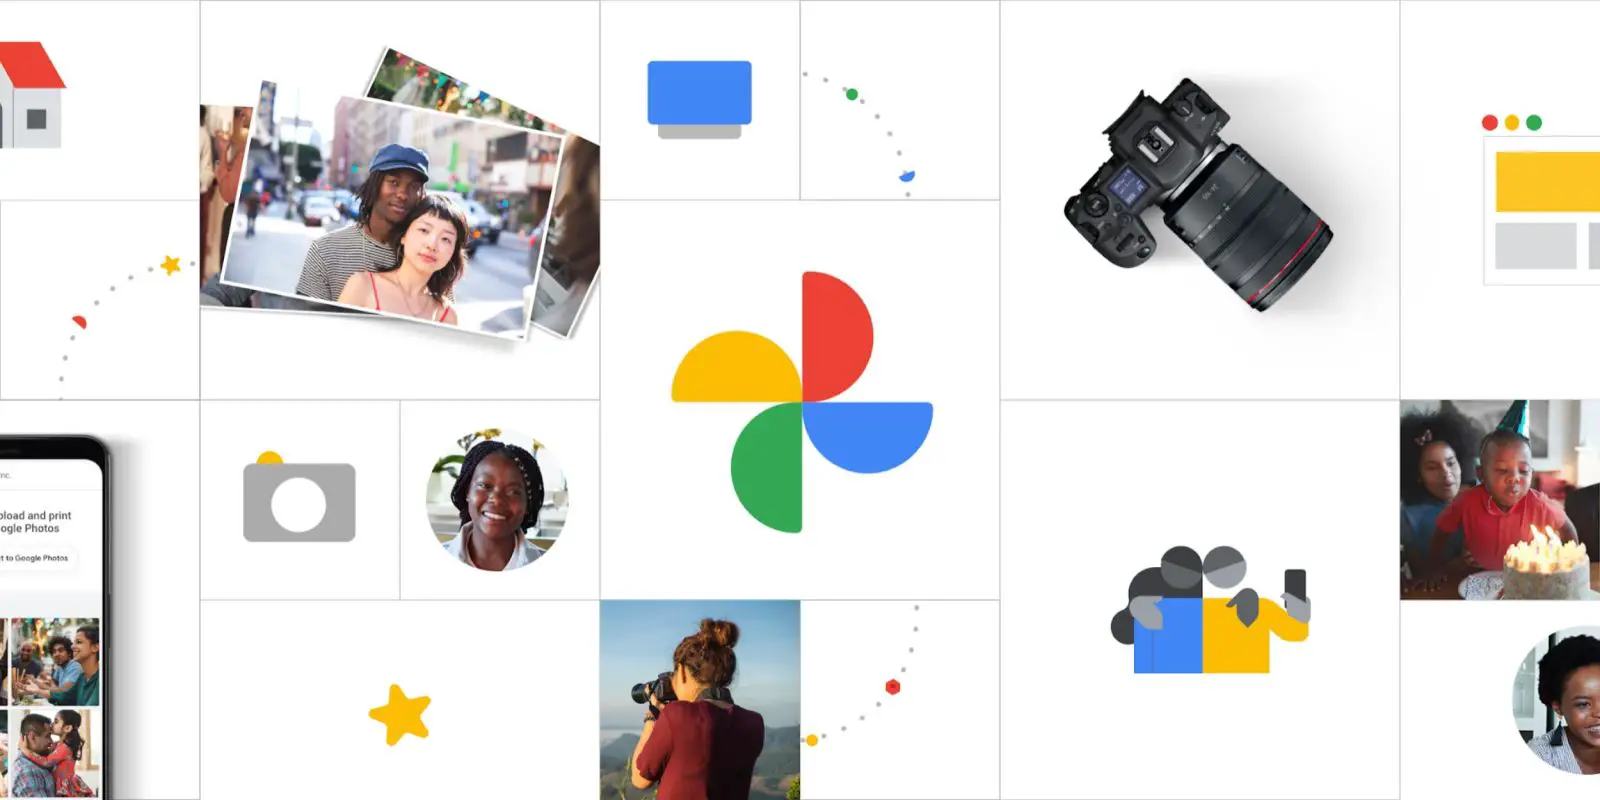 Google Photos web app editor redesigned to match its mobile counterparts, rolling out now